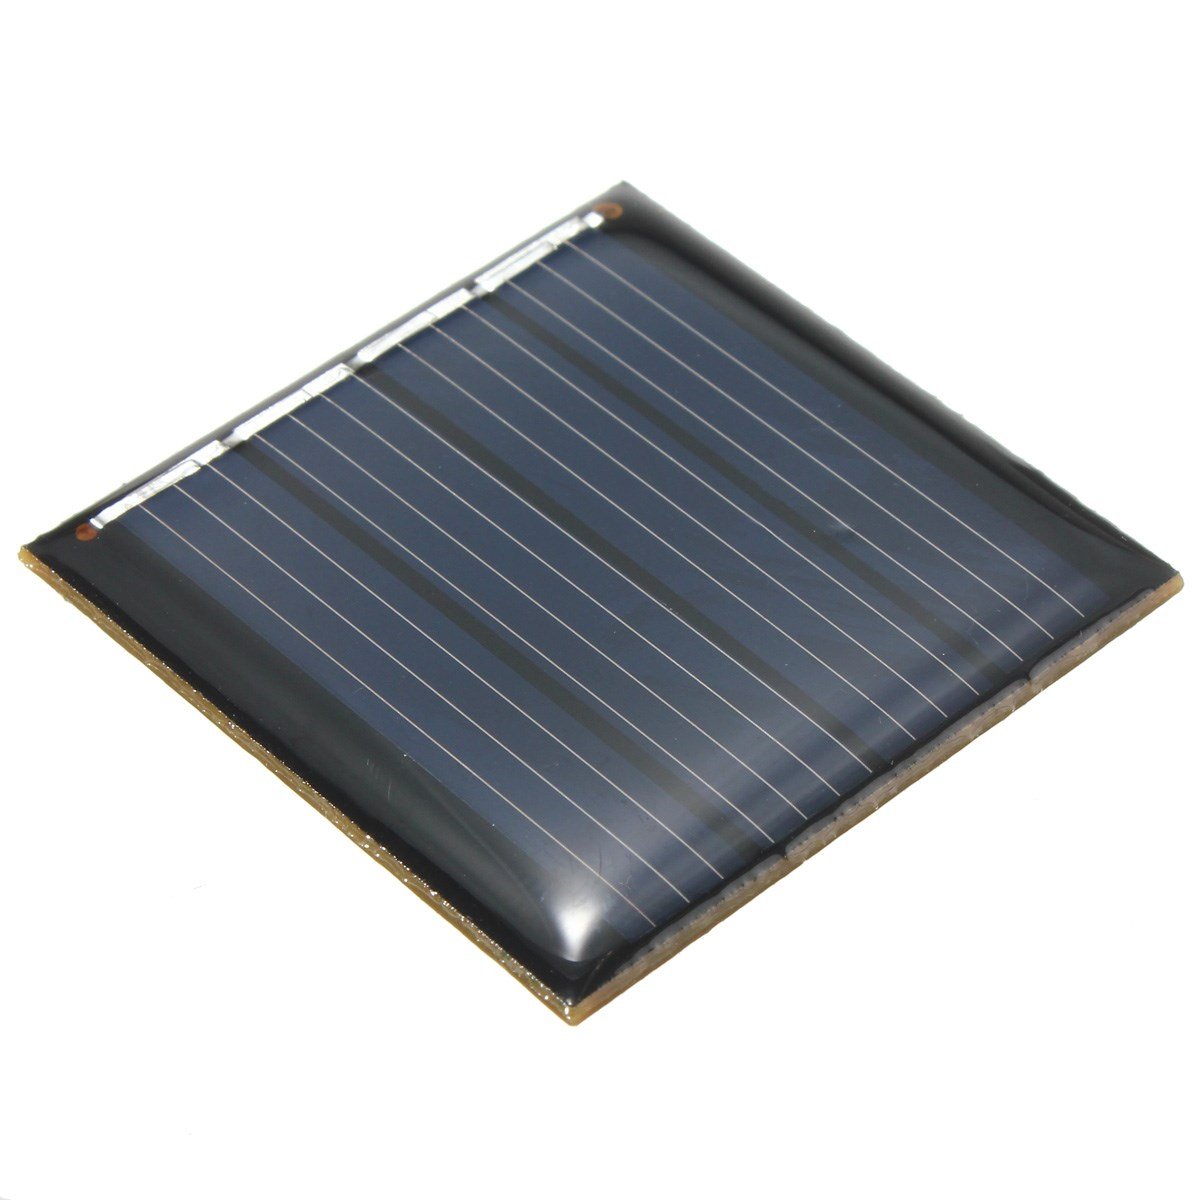 2V 0.14W Epoxy Battery Plate Polycrystalline Silicon Cell Batteries DIY Solar Powered Panels Solar Panel Cell Model 40 x 40x3mm 2